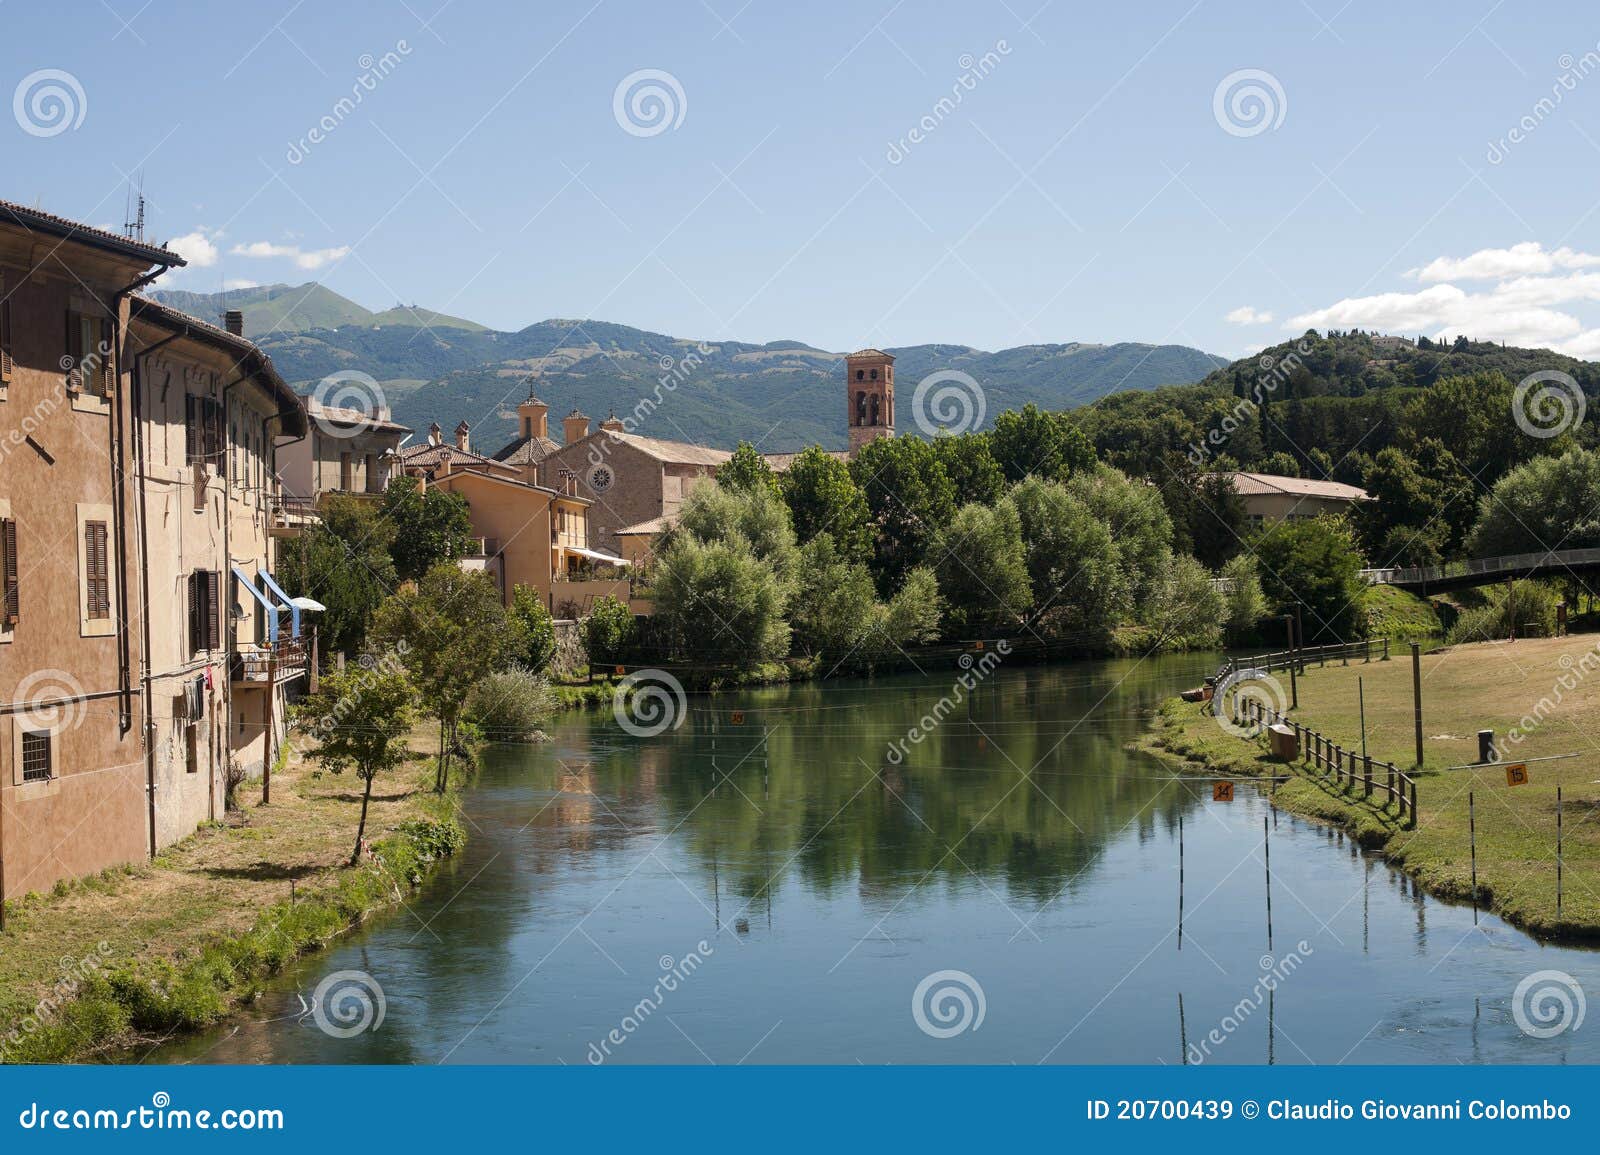 rieti (italy) - buildings on the river